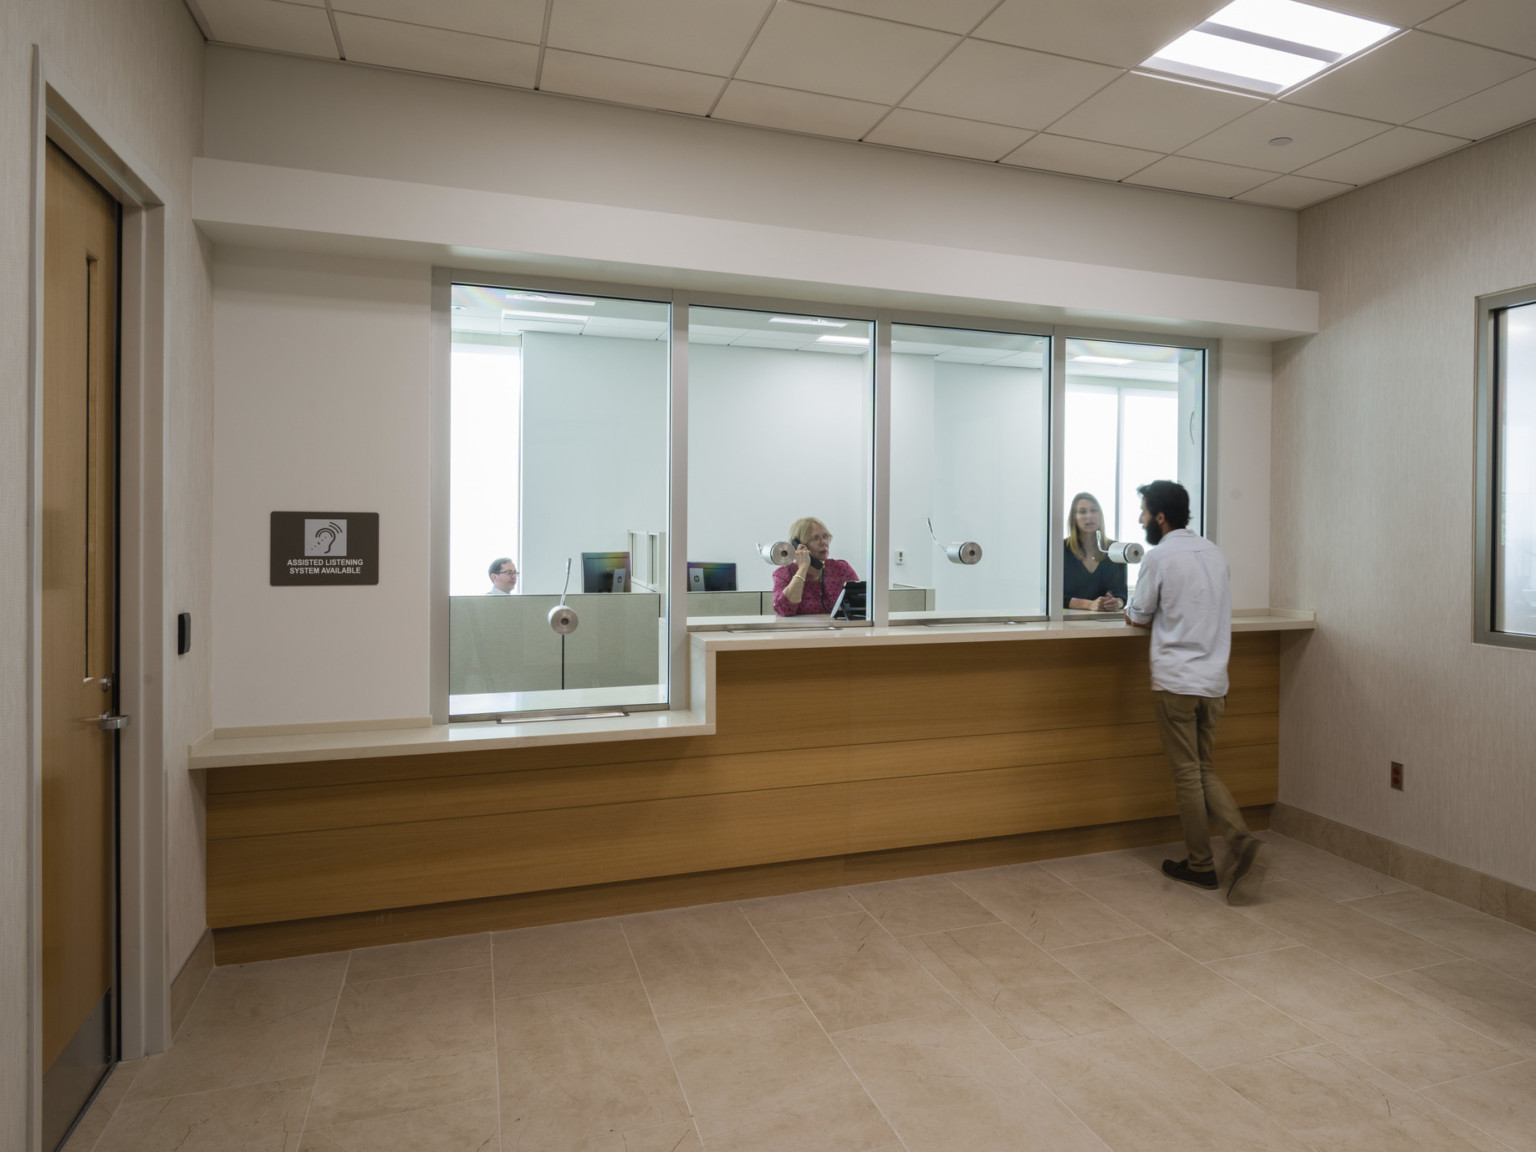 Interior reception area with wood panel desk and glass separating workers from public. White walls and tiled ceiling, wood door